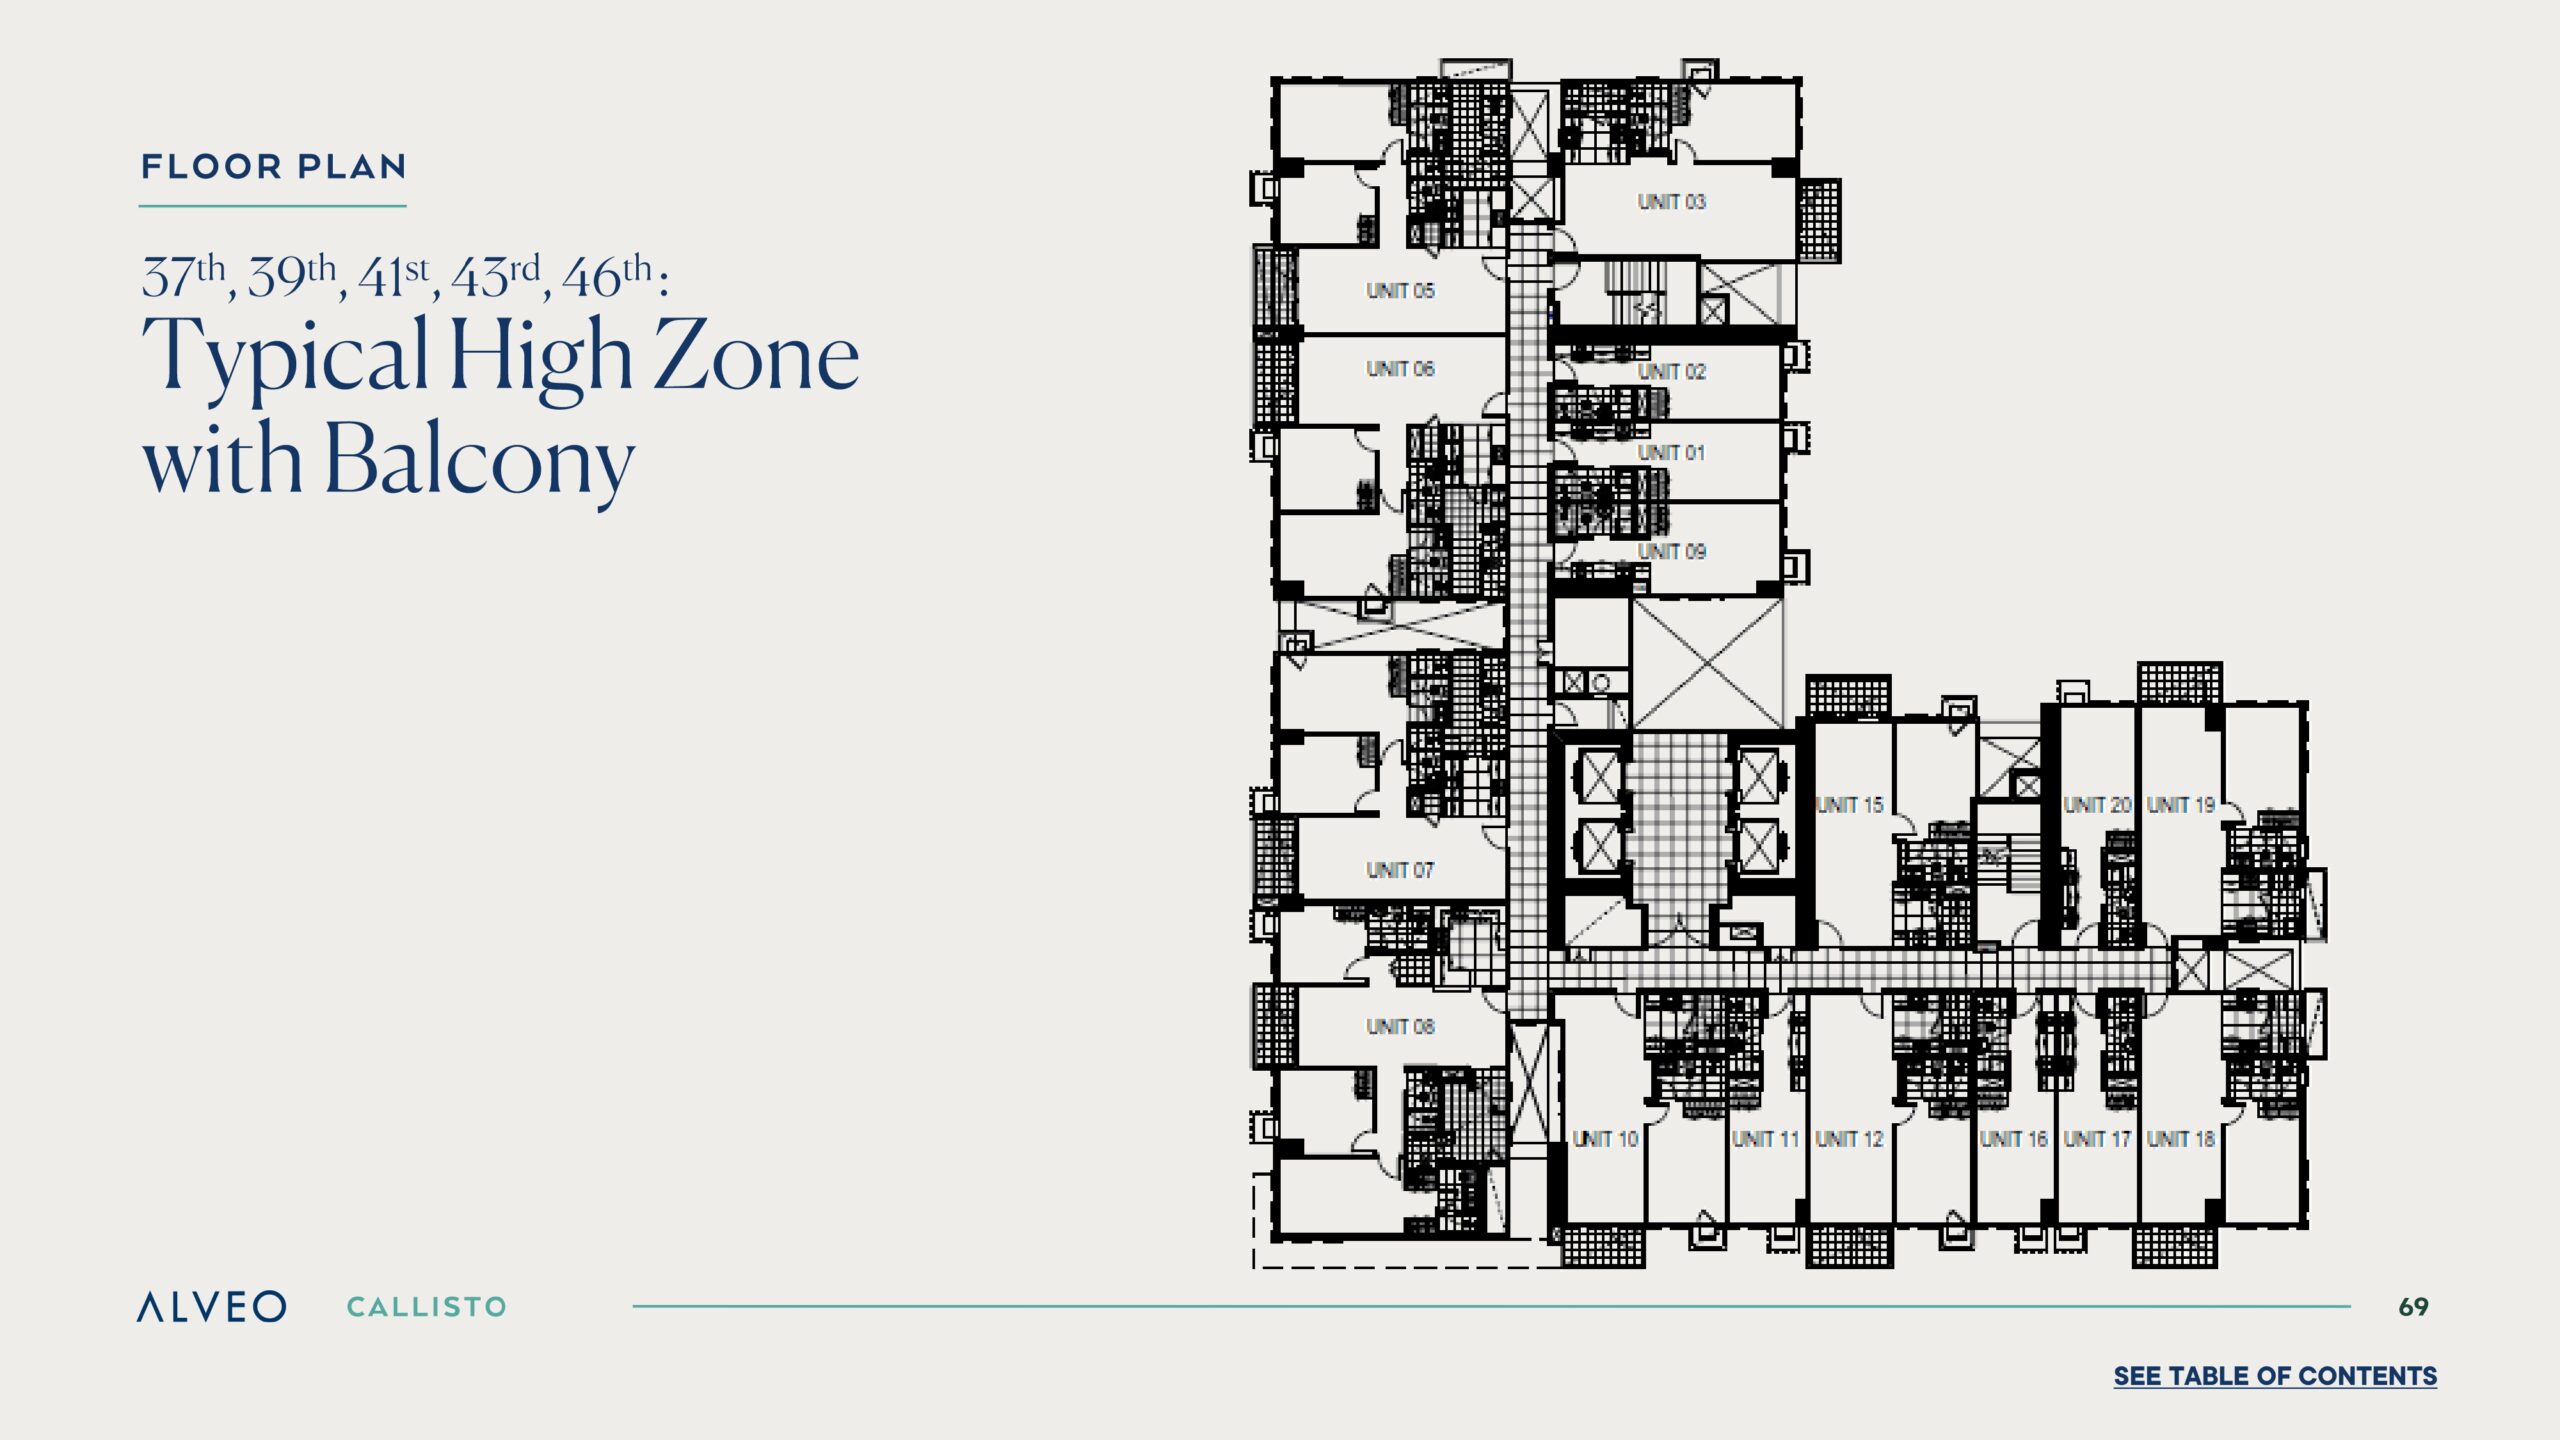 Typical High Zone with Balcony